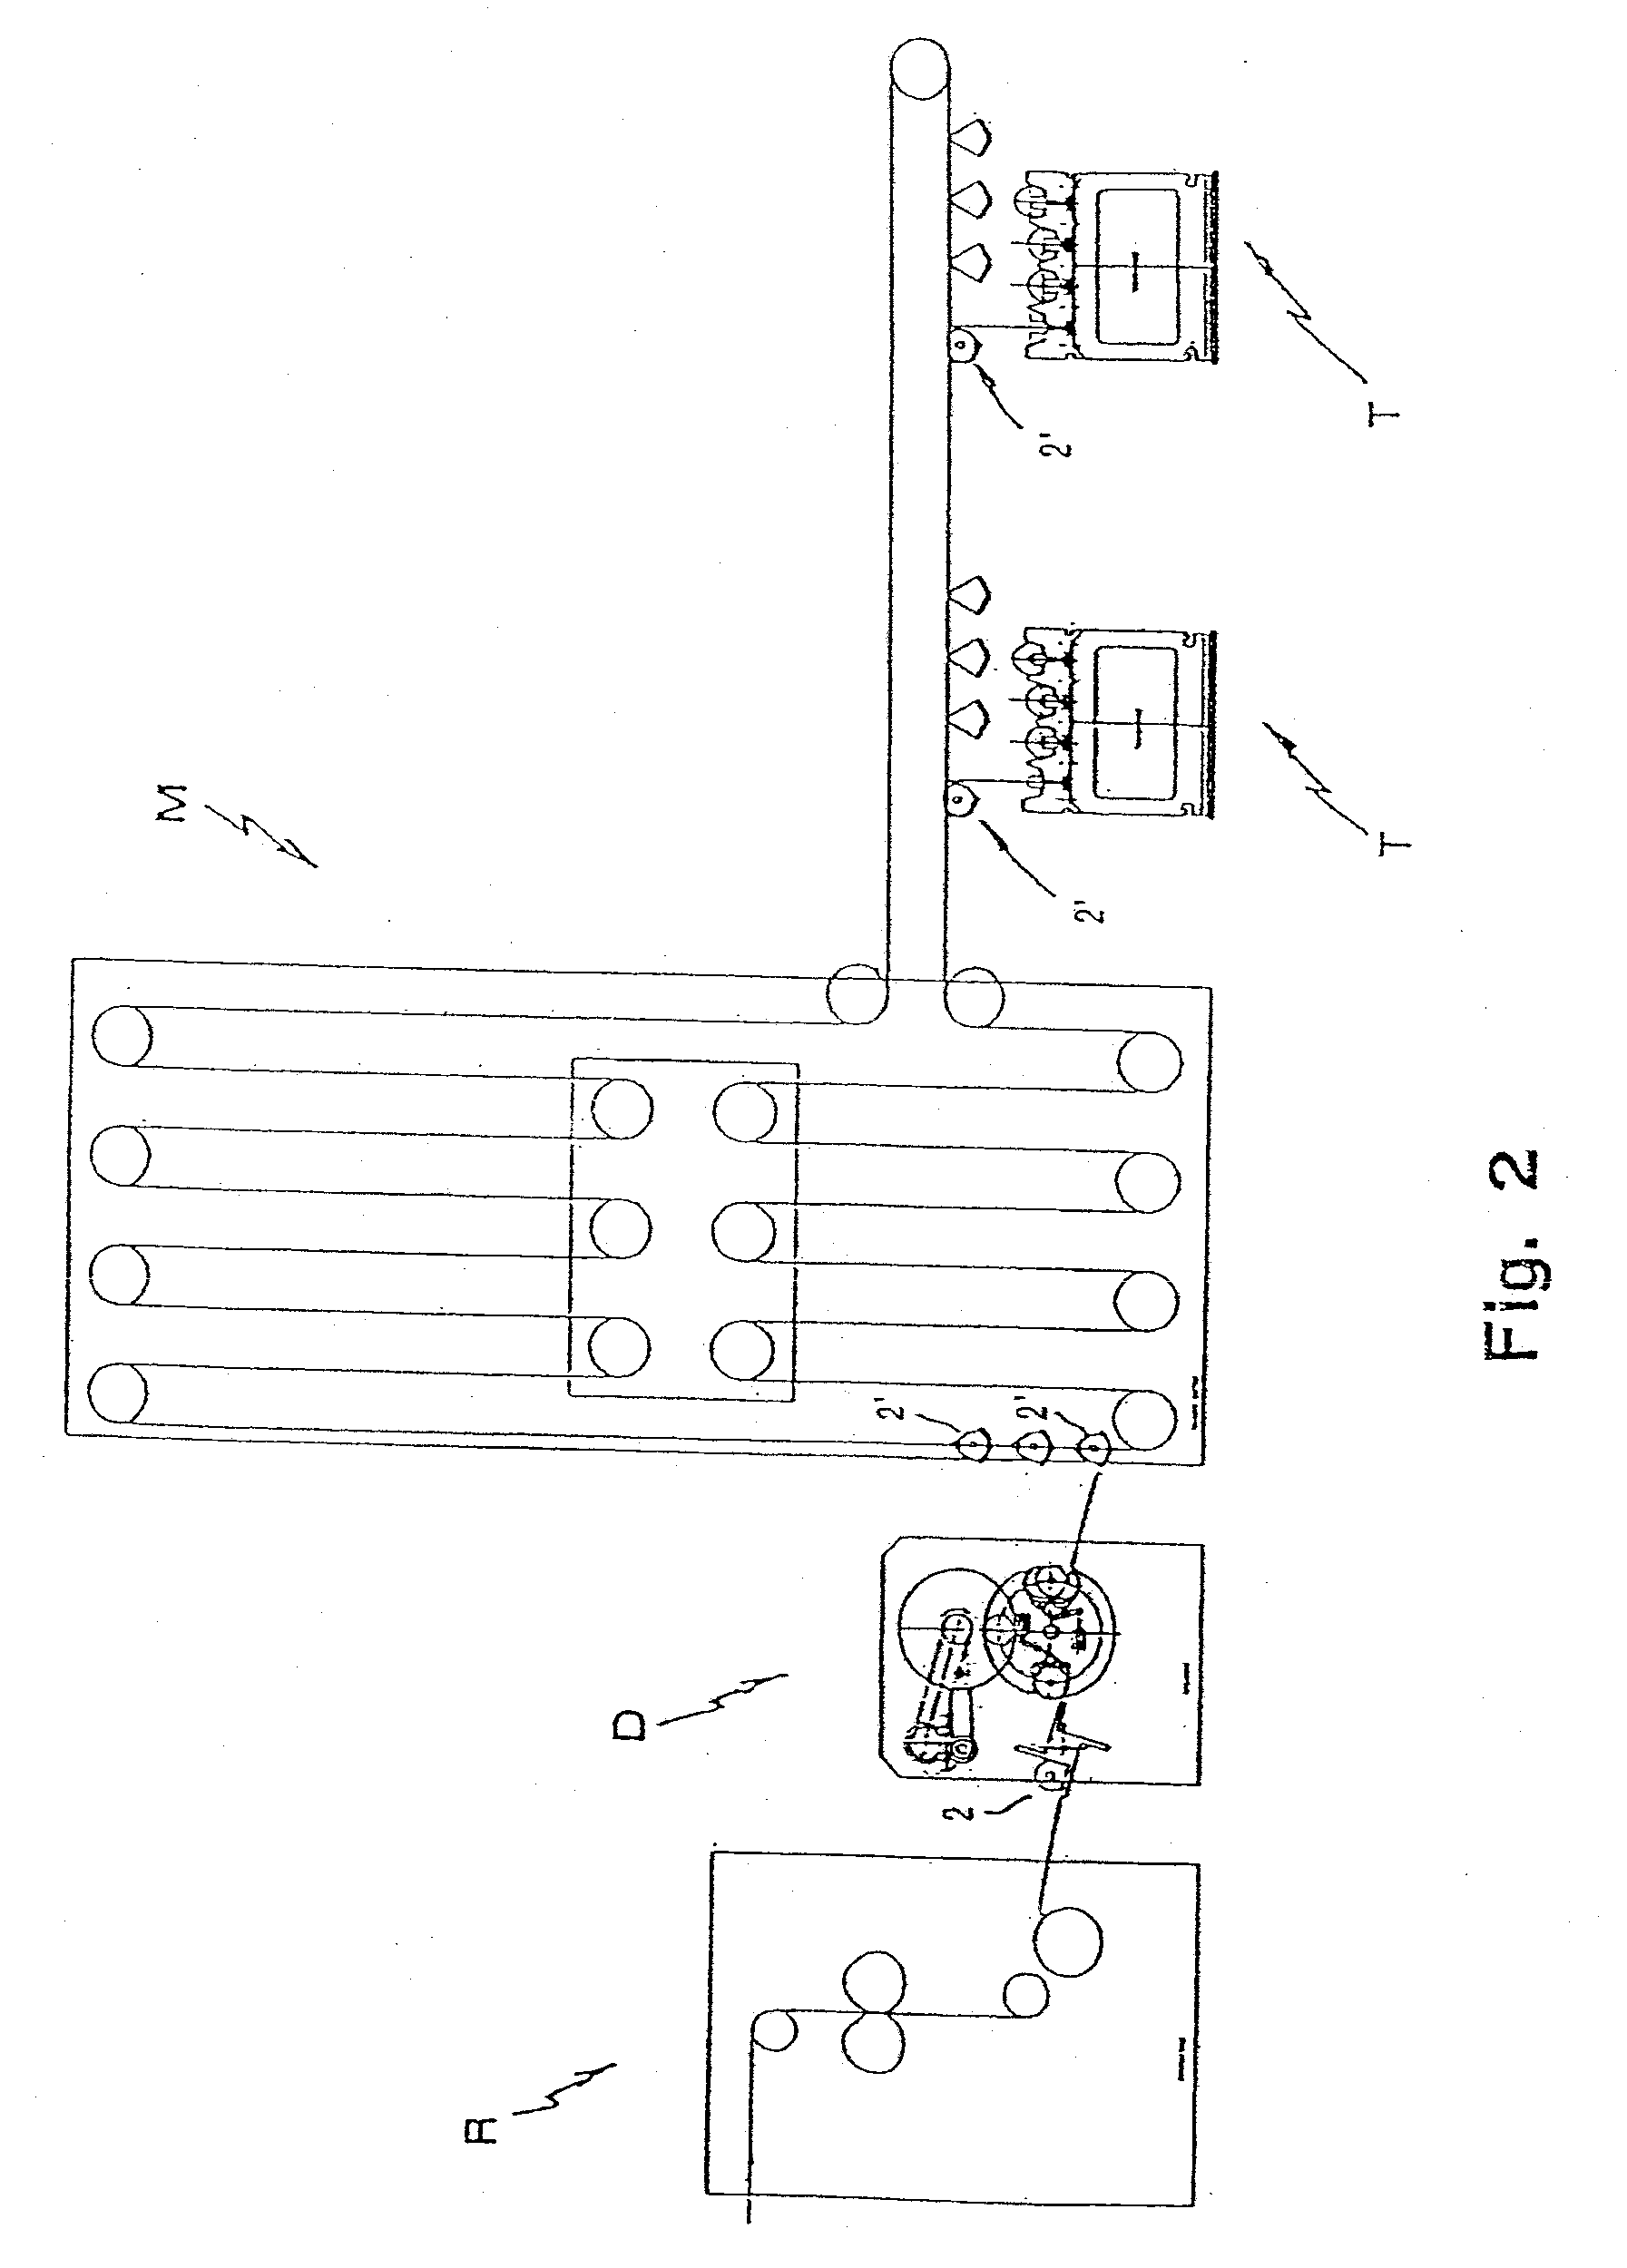 Apparatus for trimming paper rolls or logs and an operating method for treating the logs